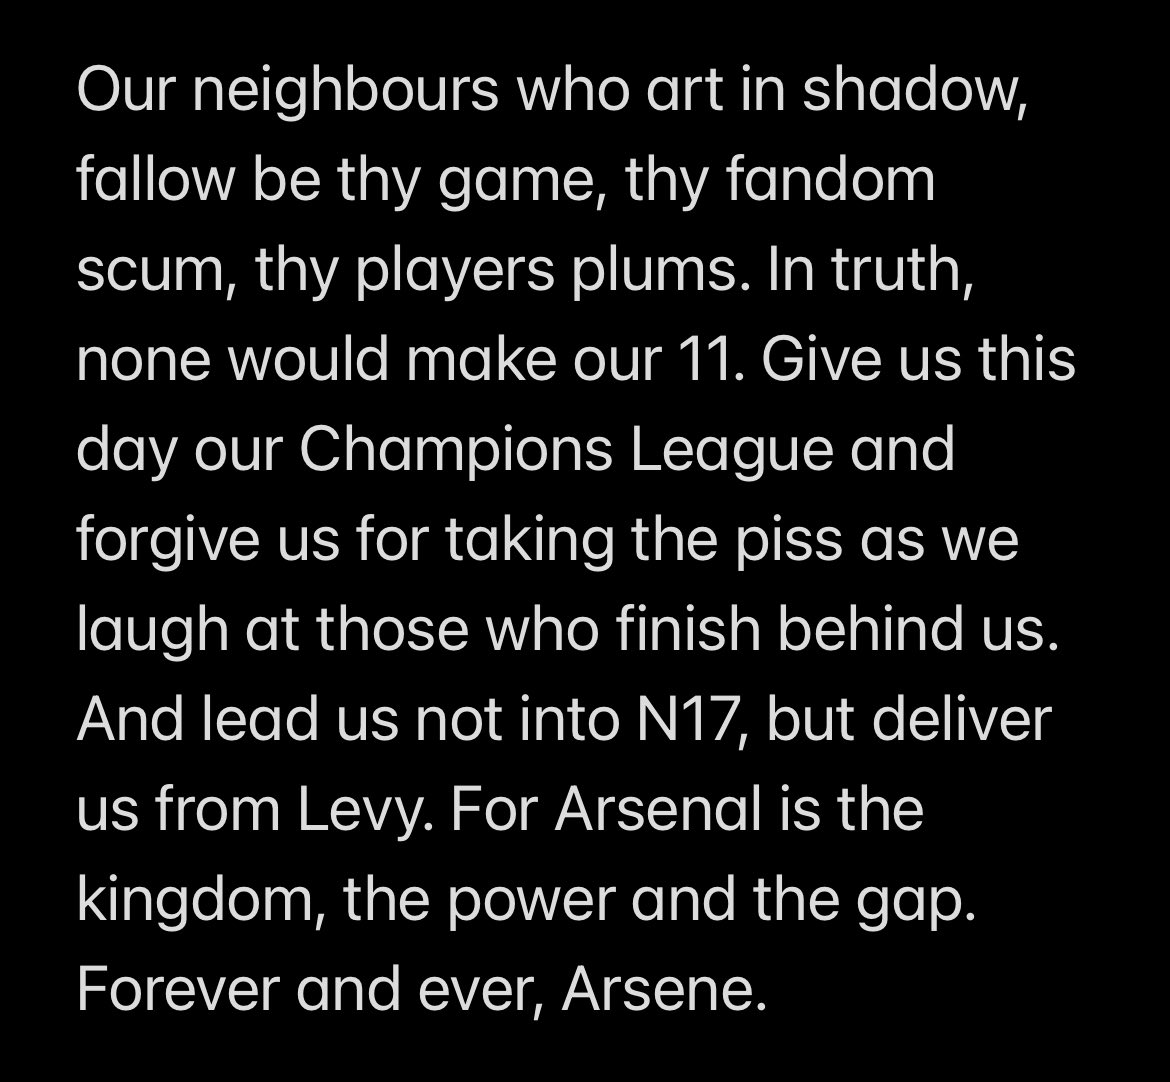 The St. Totteringham’s Day Prayer by the Brisbane Gunners and via @gunnerblog. Needs to be shared as I’ve not seen it on here. @LauraKirk12 @ConMarbleHalls @nigel_b_golf @HandofOzil